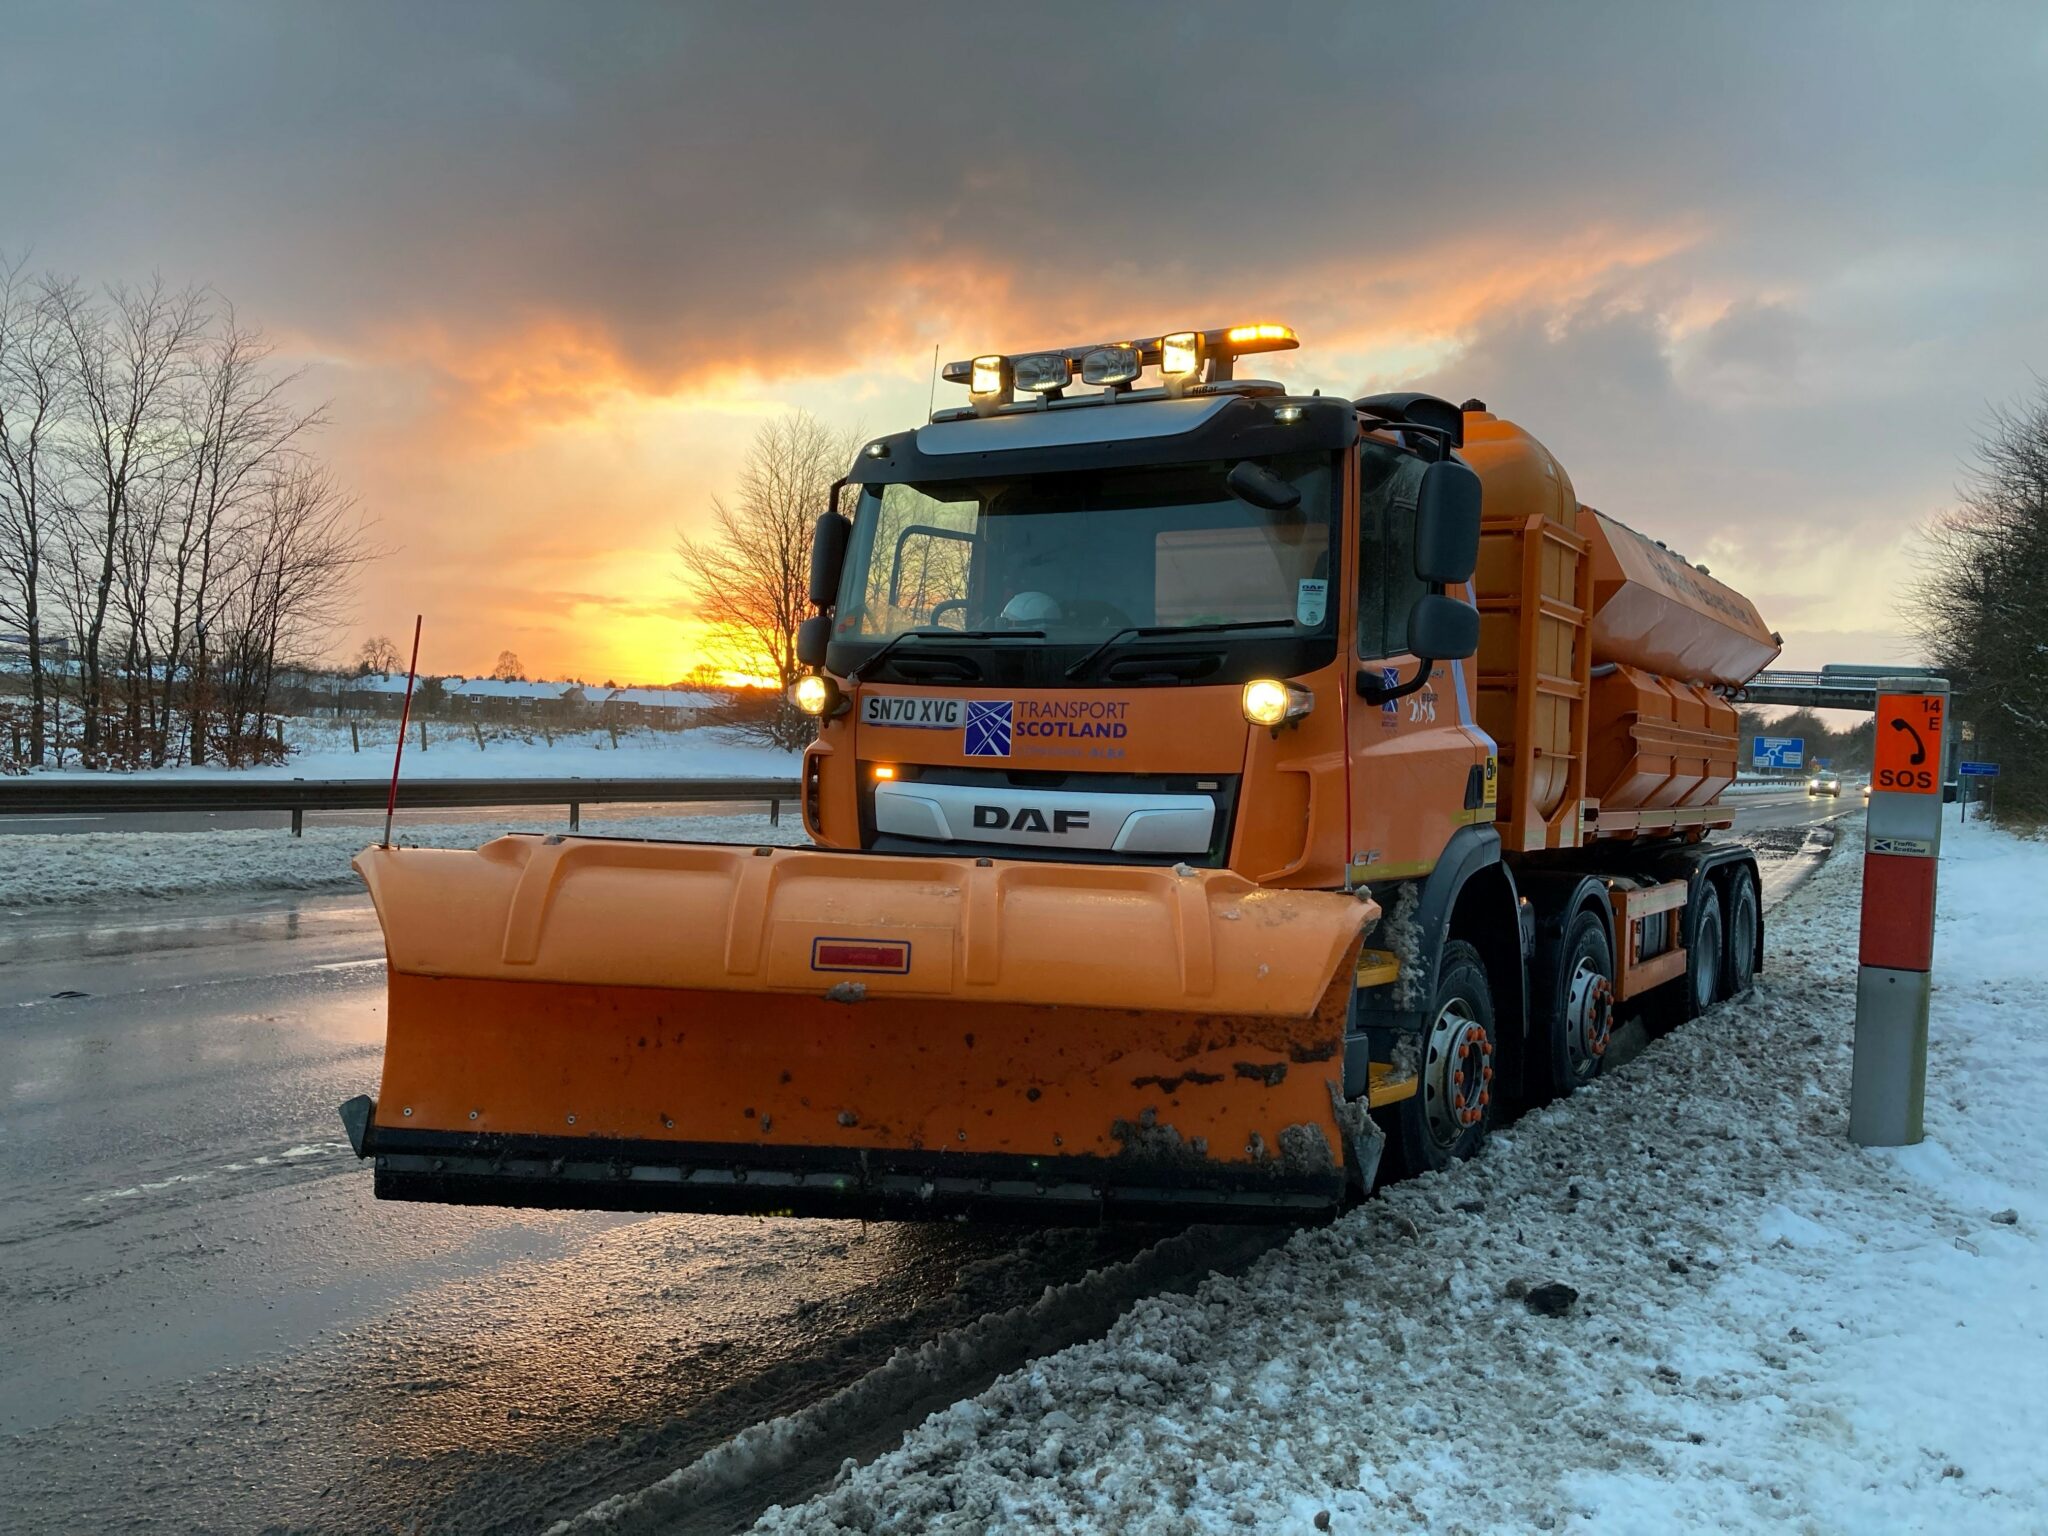 REVIEW OF WINTER SERVICE IN SOUTH EAST SCOTLAND